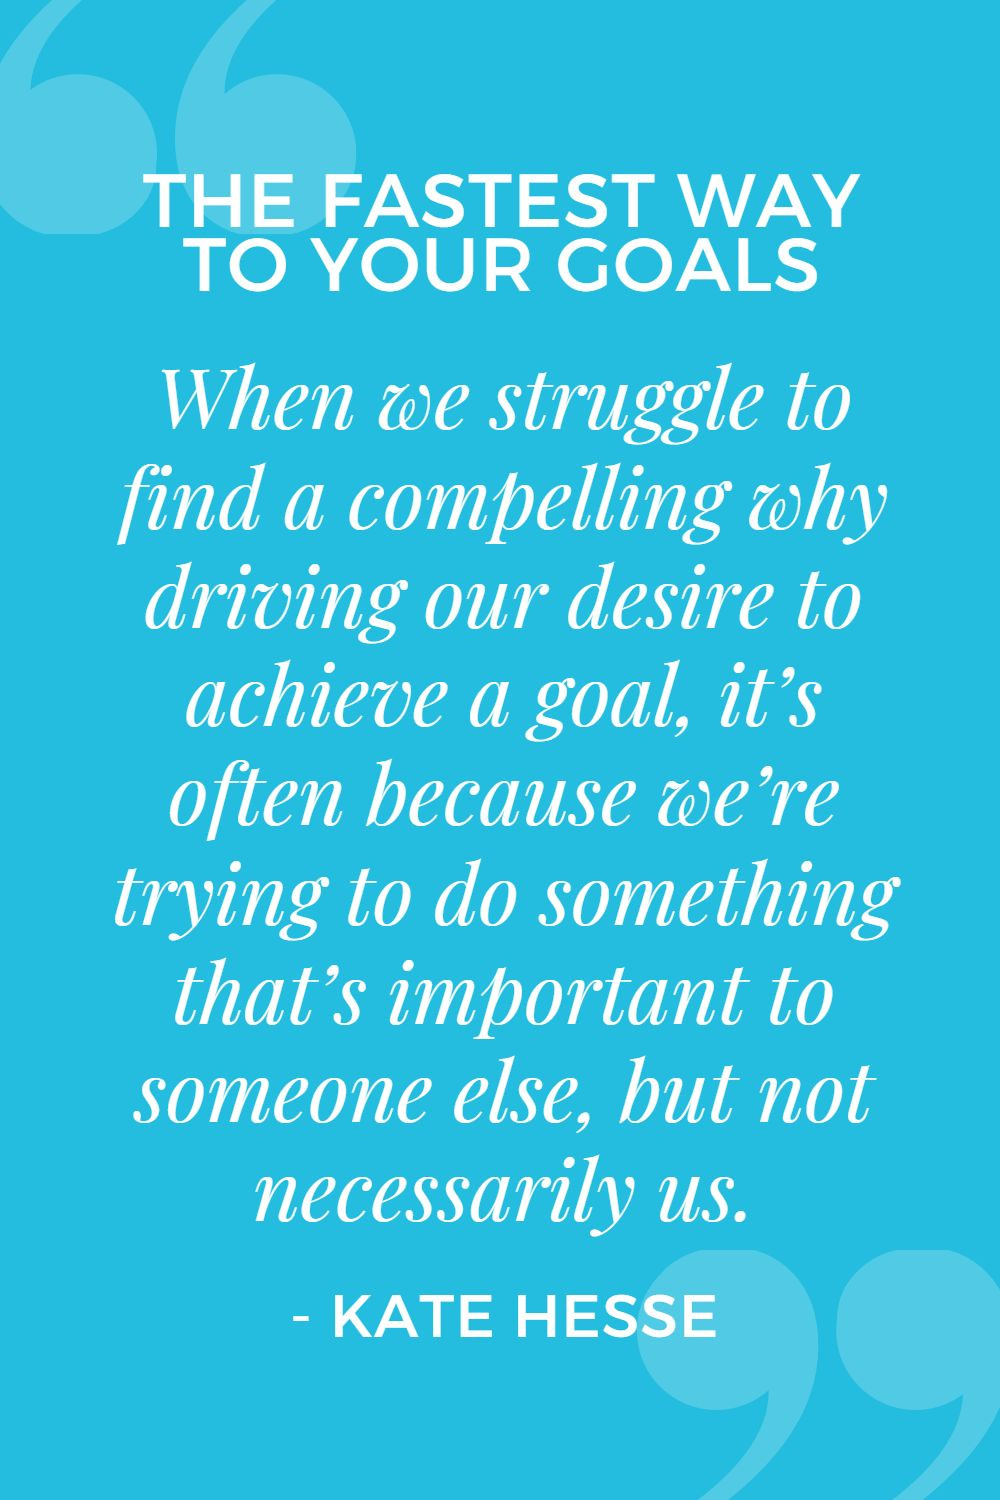 When we struggle to find a compelling why driving our desire to achieve a goal, it's often because we're trying to do something that's important to someone else, but not necessarily us.